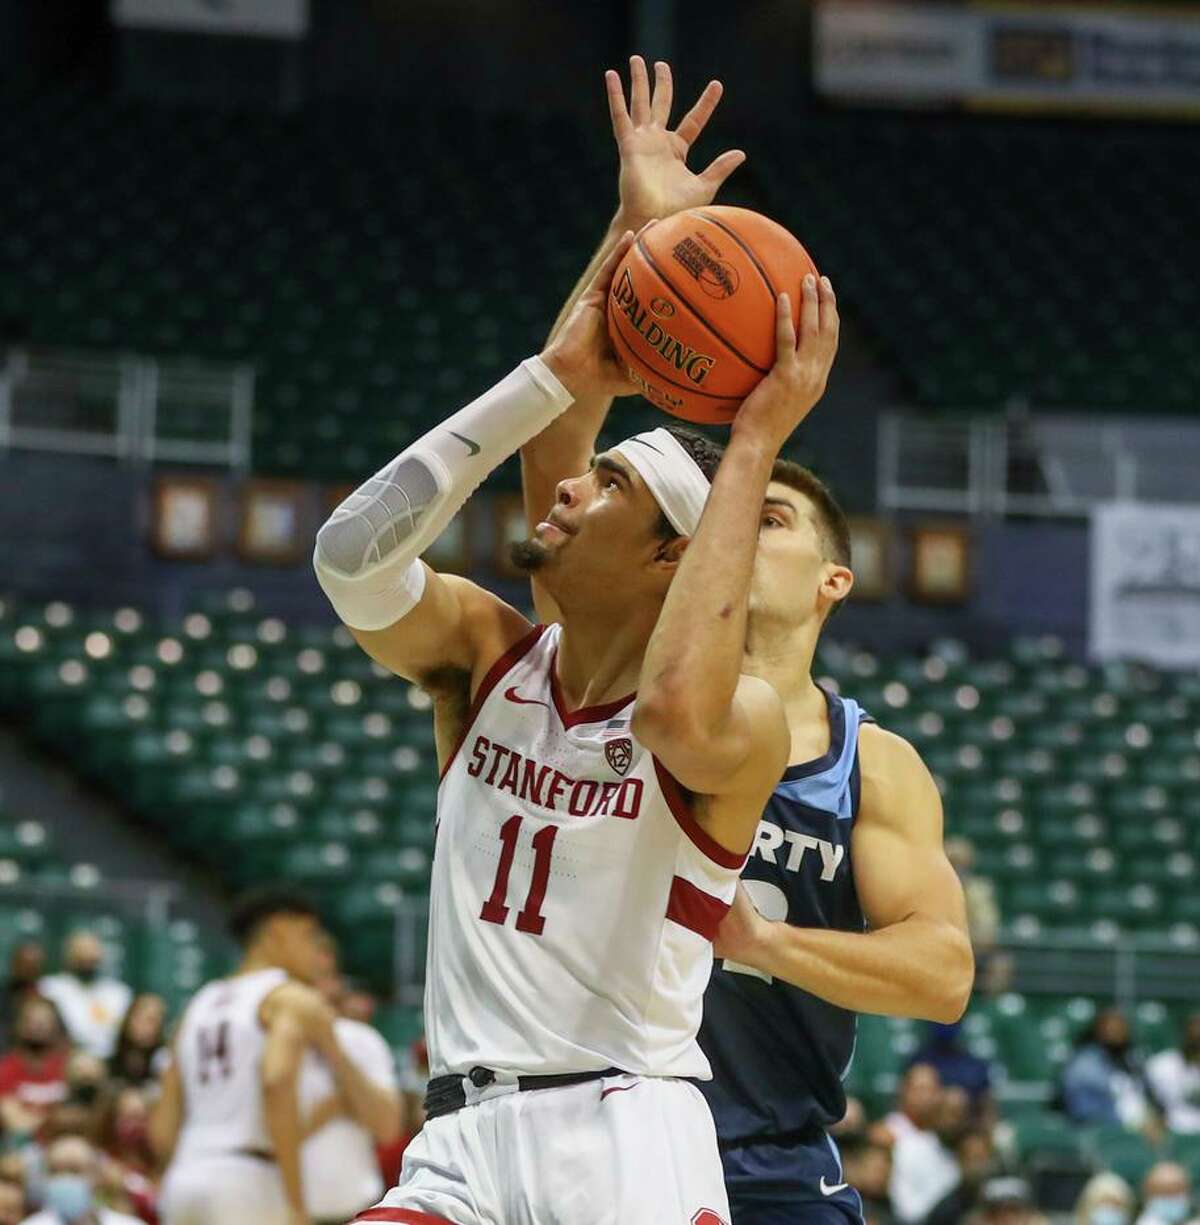 Stanford’s Jaiden Delaire tries to get off a shot during his team’s most recent game, a win over Liberty in Honolulu on Dec. 23. The Cardinal, who have had four games canceled or postponed because of a coronavirus outbreak in their program, are scheduled to resume their season Tuesday with a game against USC at Maples Pavilion.